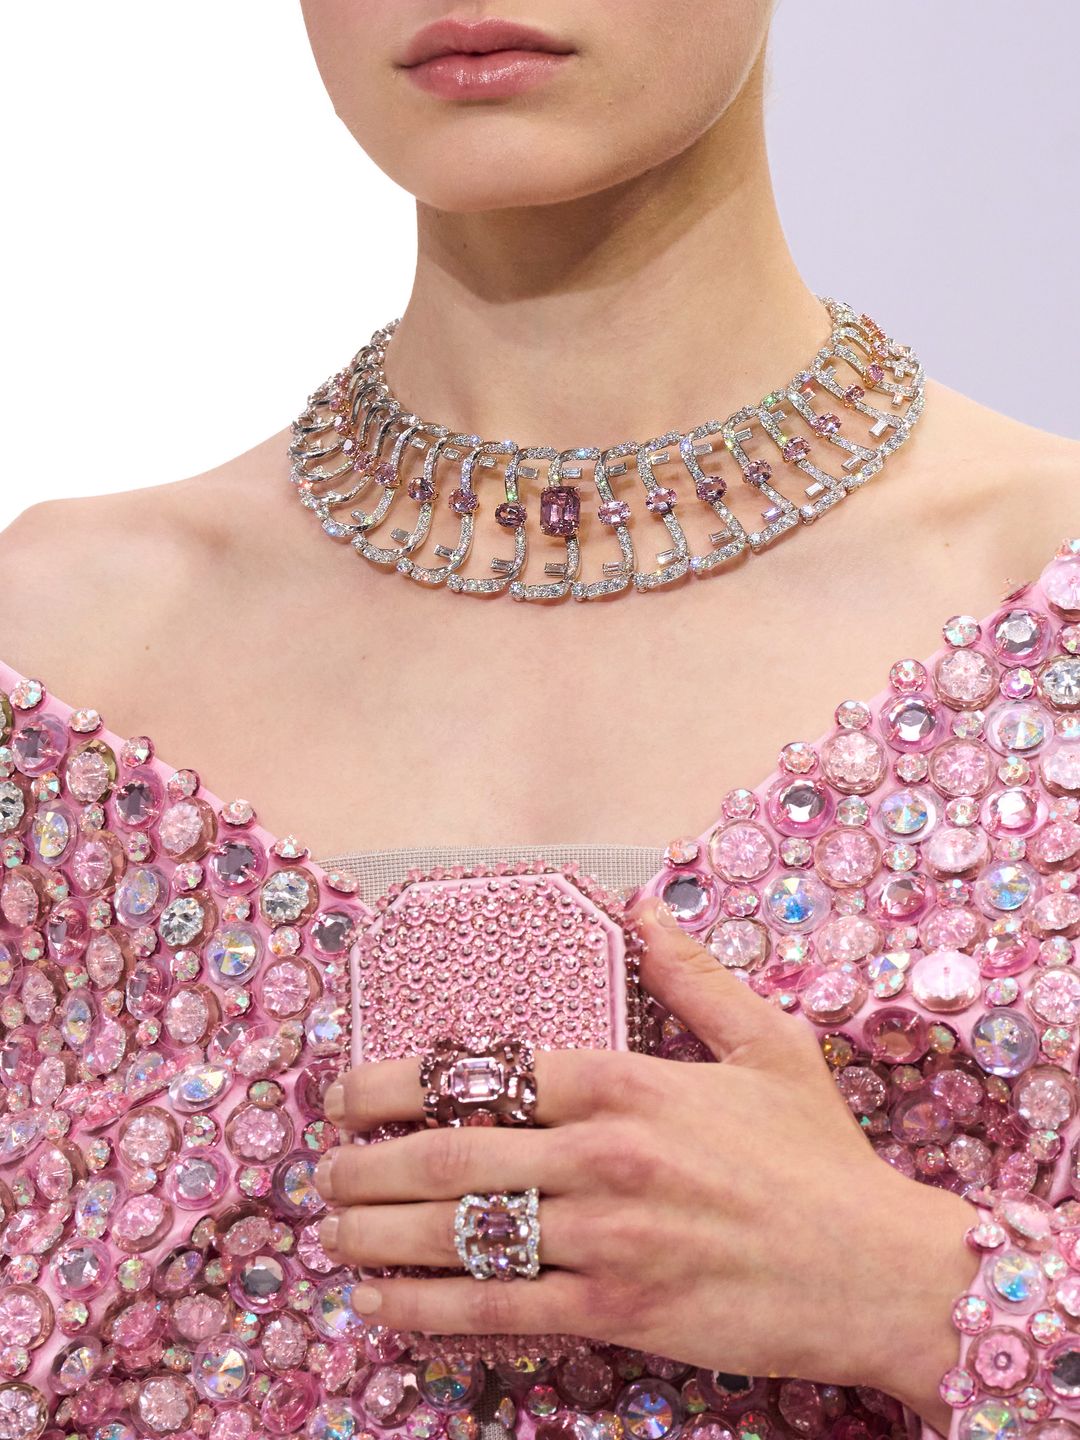 Model wearing dazzling pink dress with statement necklace and ring 